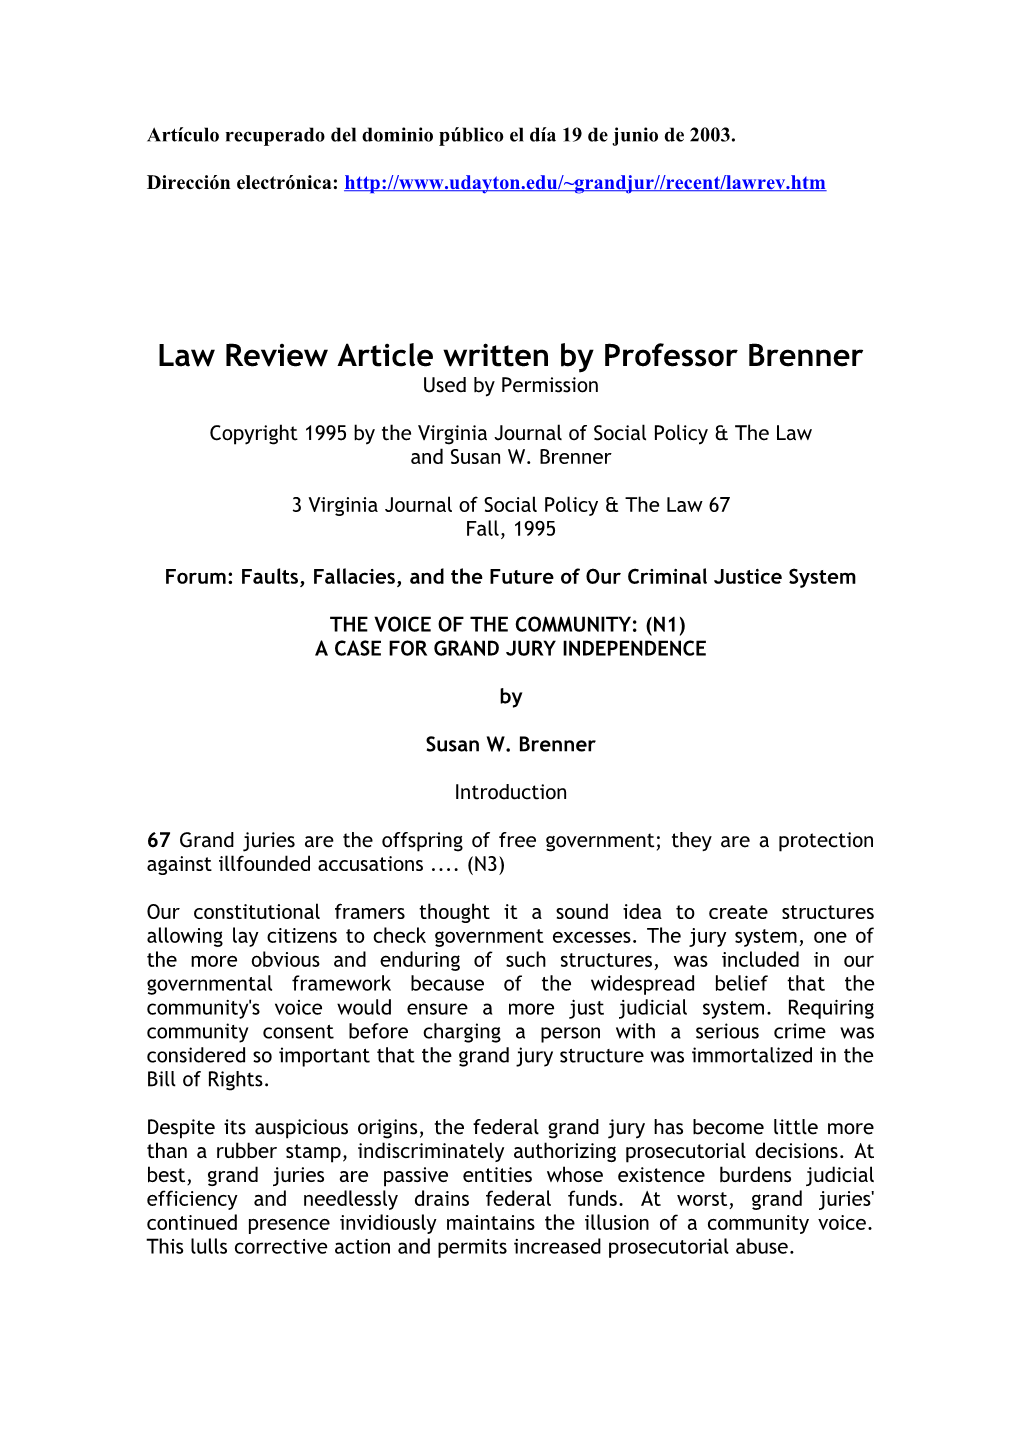 Law Review Article Written by Professor Brenner